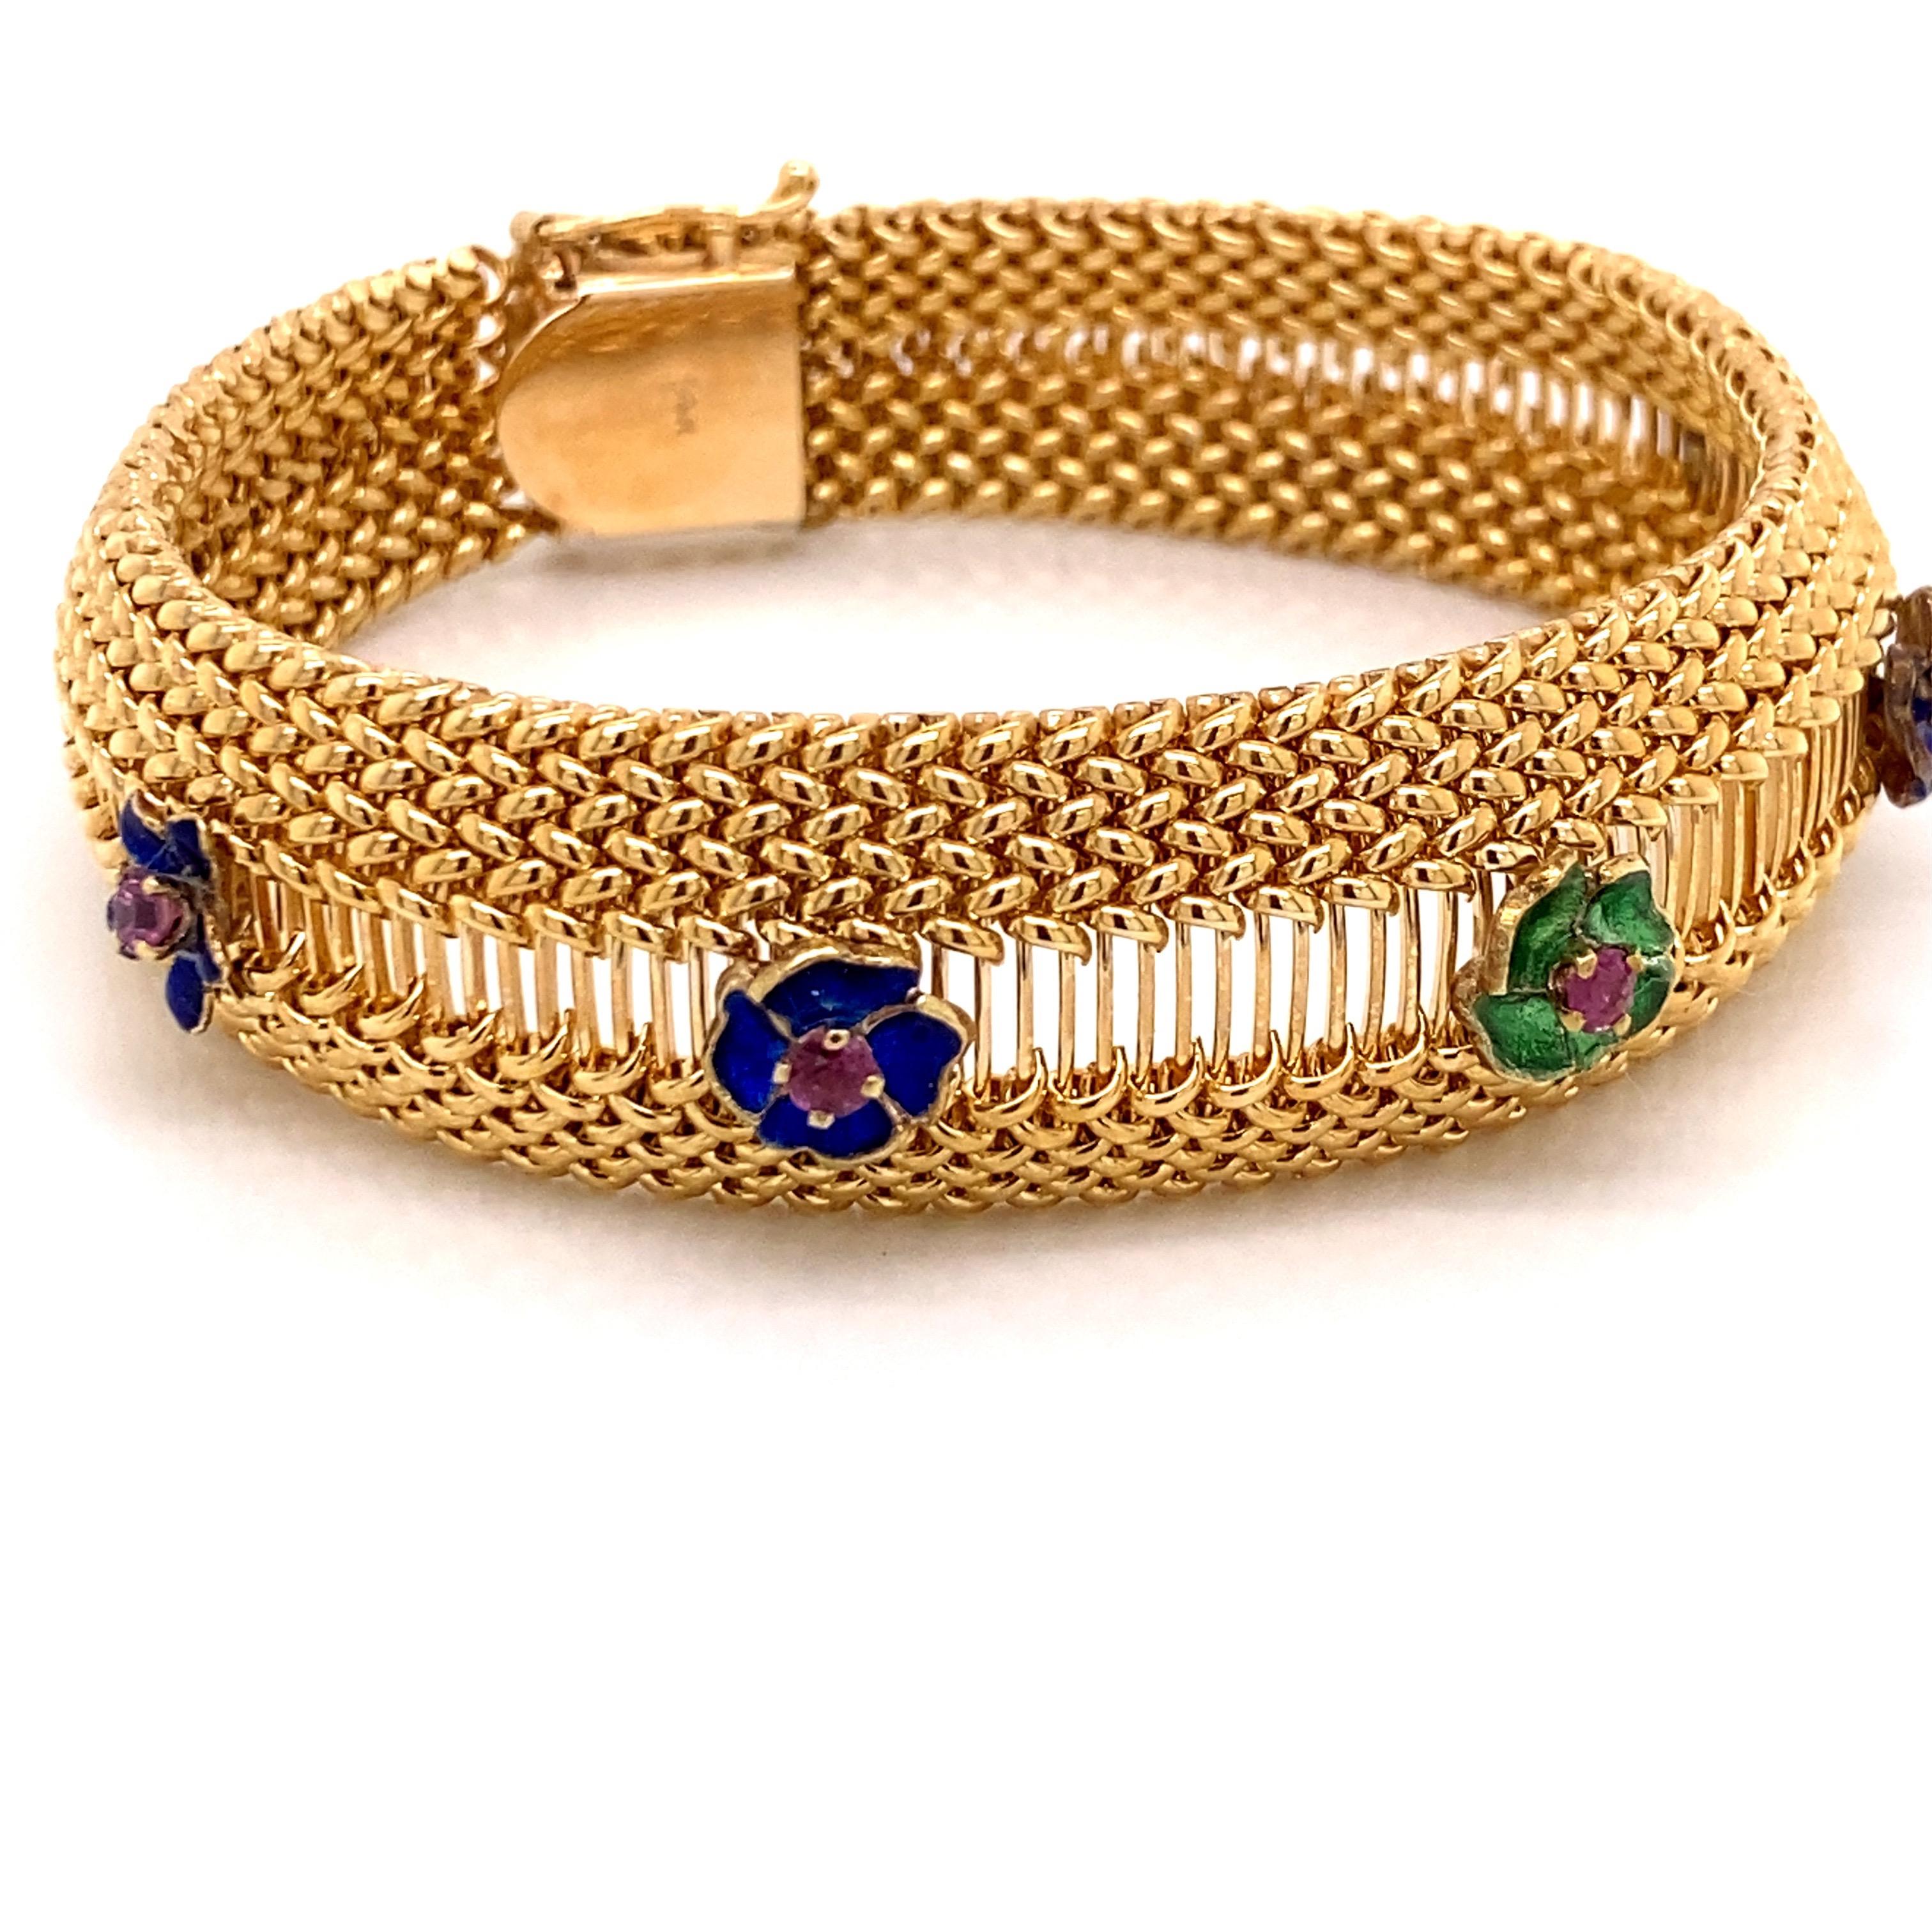 Vintage 1960s 14K Yellow Gold Mesh Bracelet with Enamel Flowers and Rubies - The bracelet measures 7.5 inches long and .75 inches wide in the center. The five Rubies inside the blue and green enamel flowers weigh approximately .50ct. The bracelet